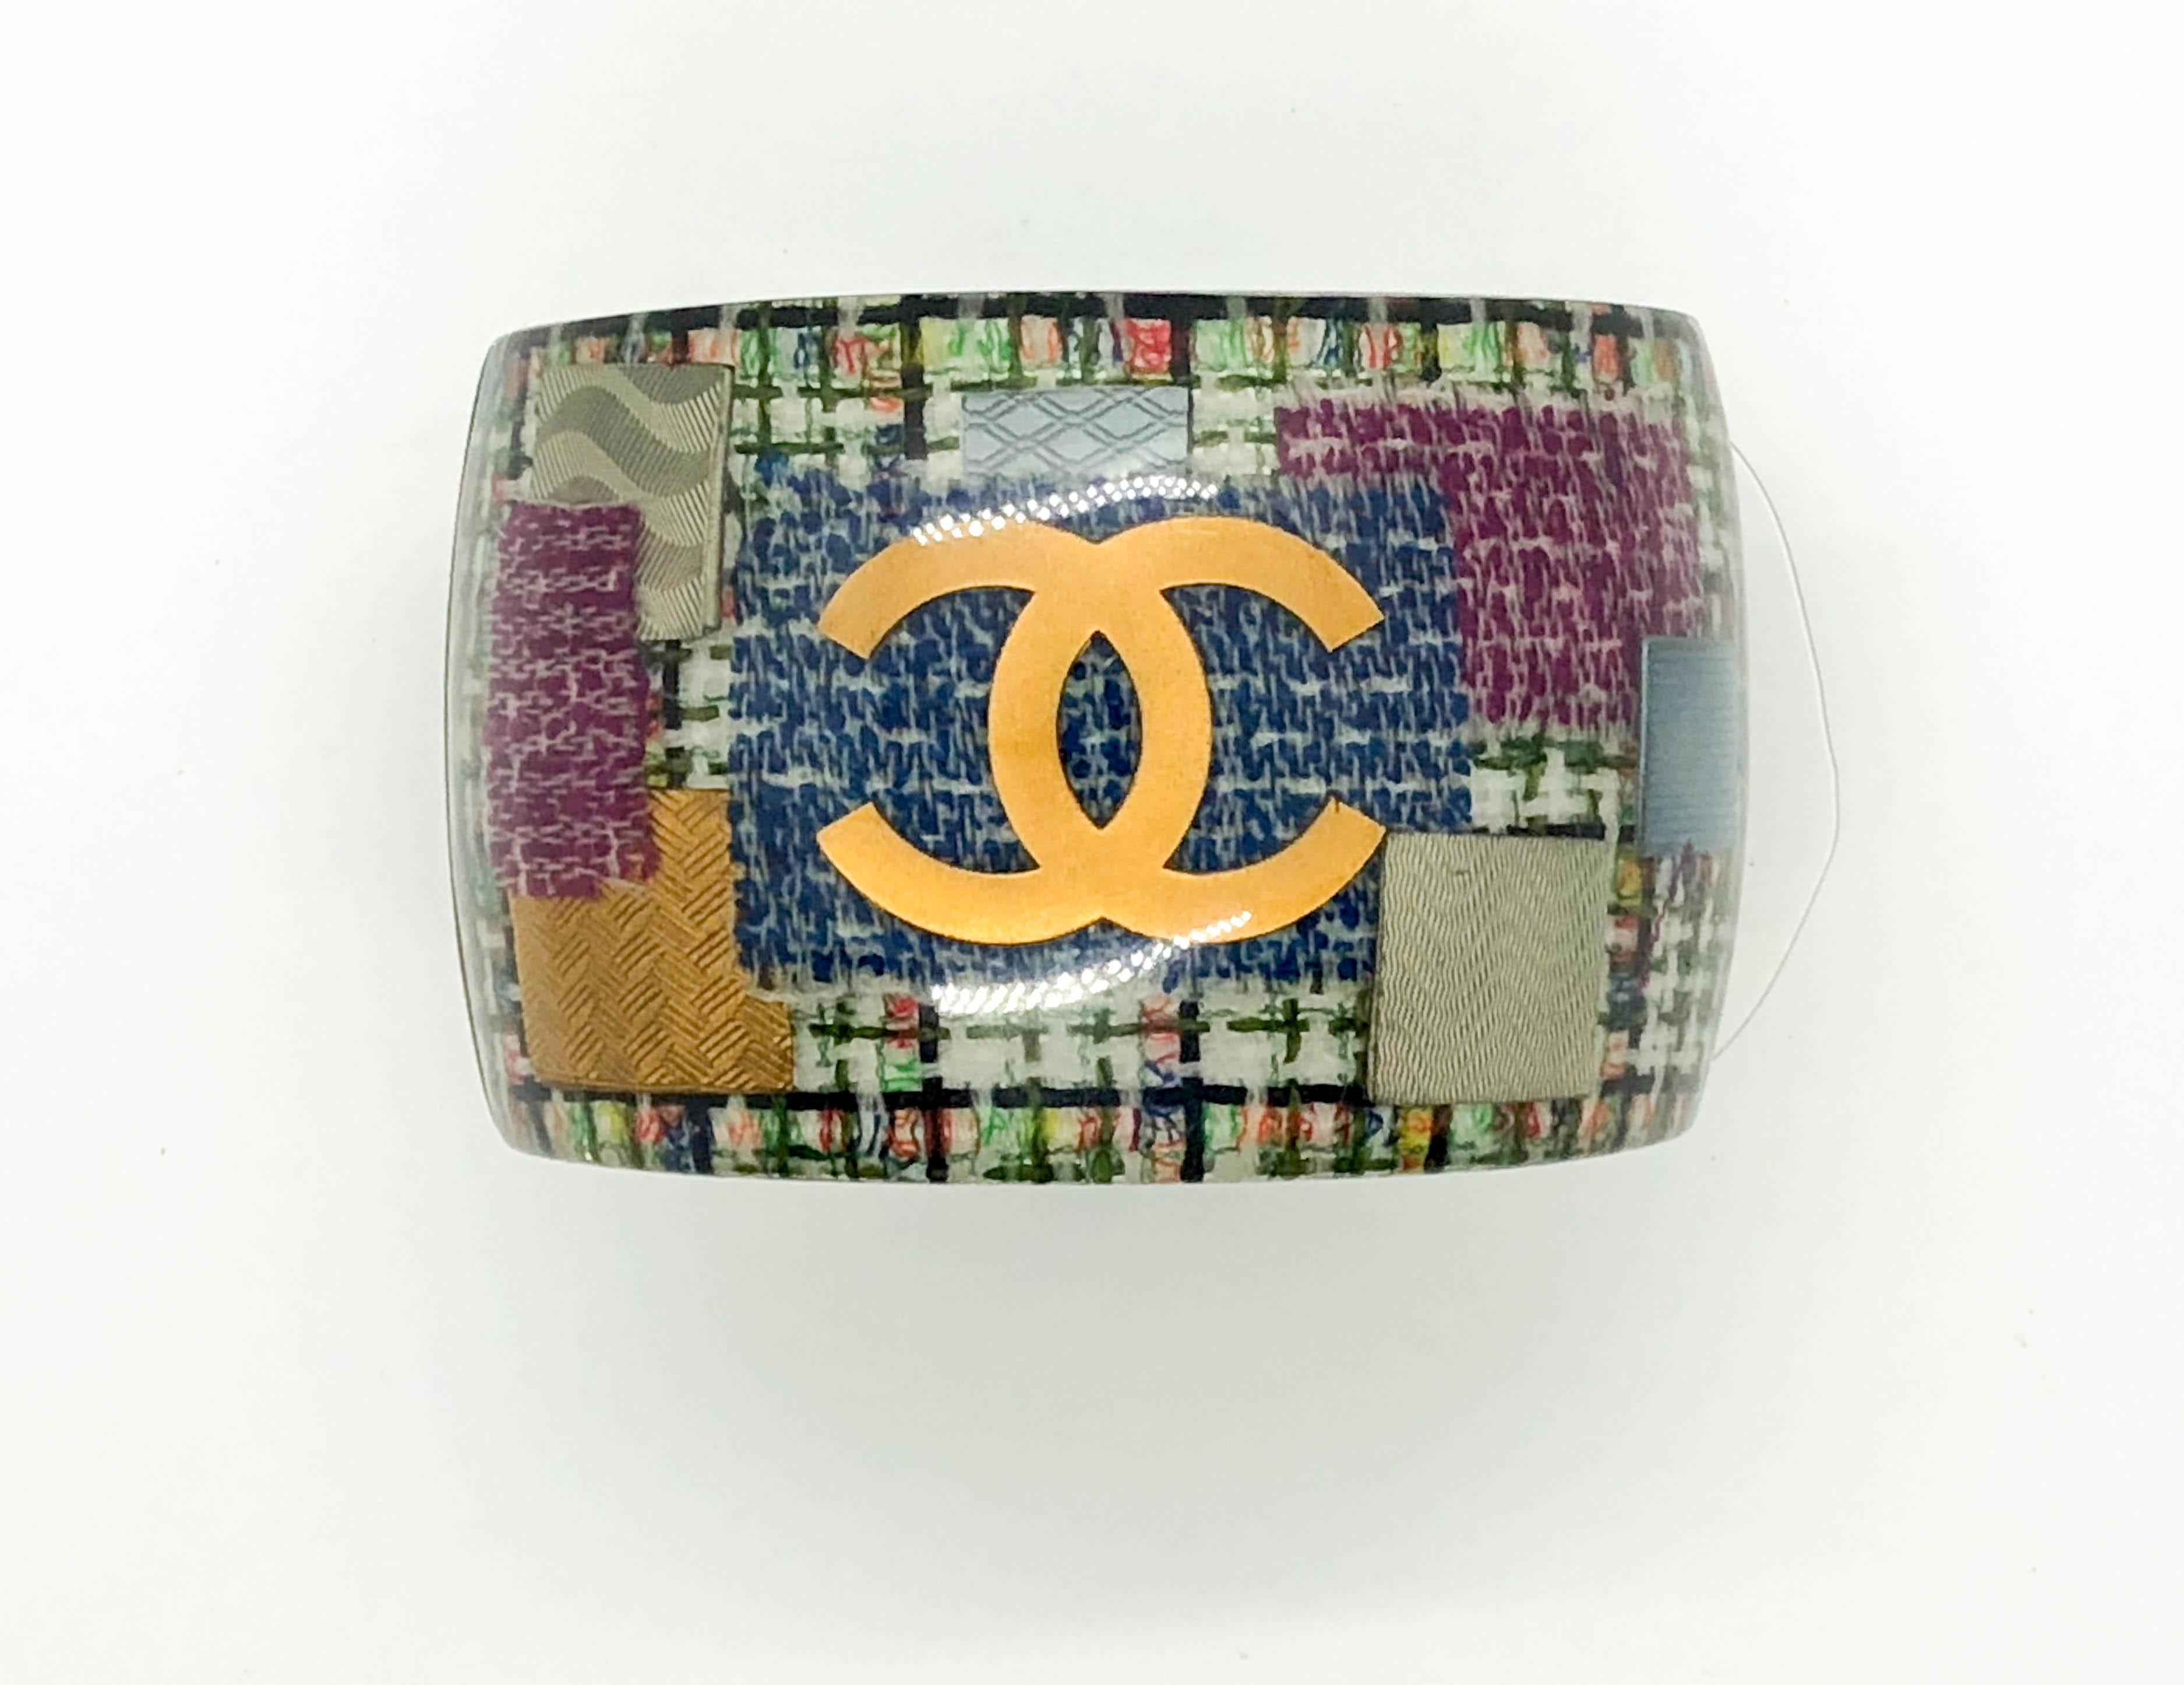 2015 Chanel 'Tweed We Need' Plexiglass Cuff Bracelet In Excellent Condition For Sale In London, Chelsea